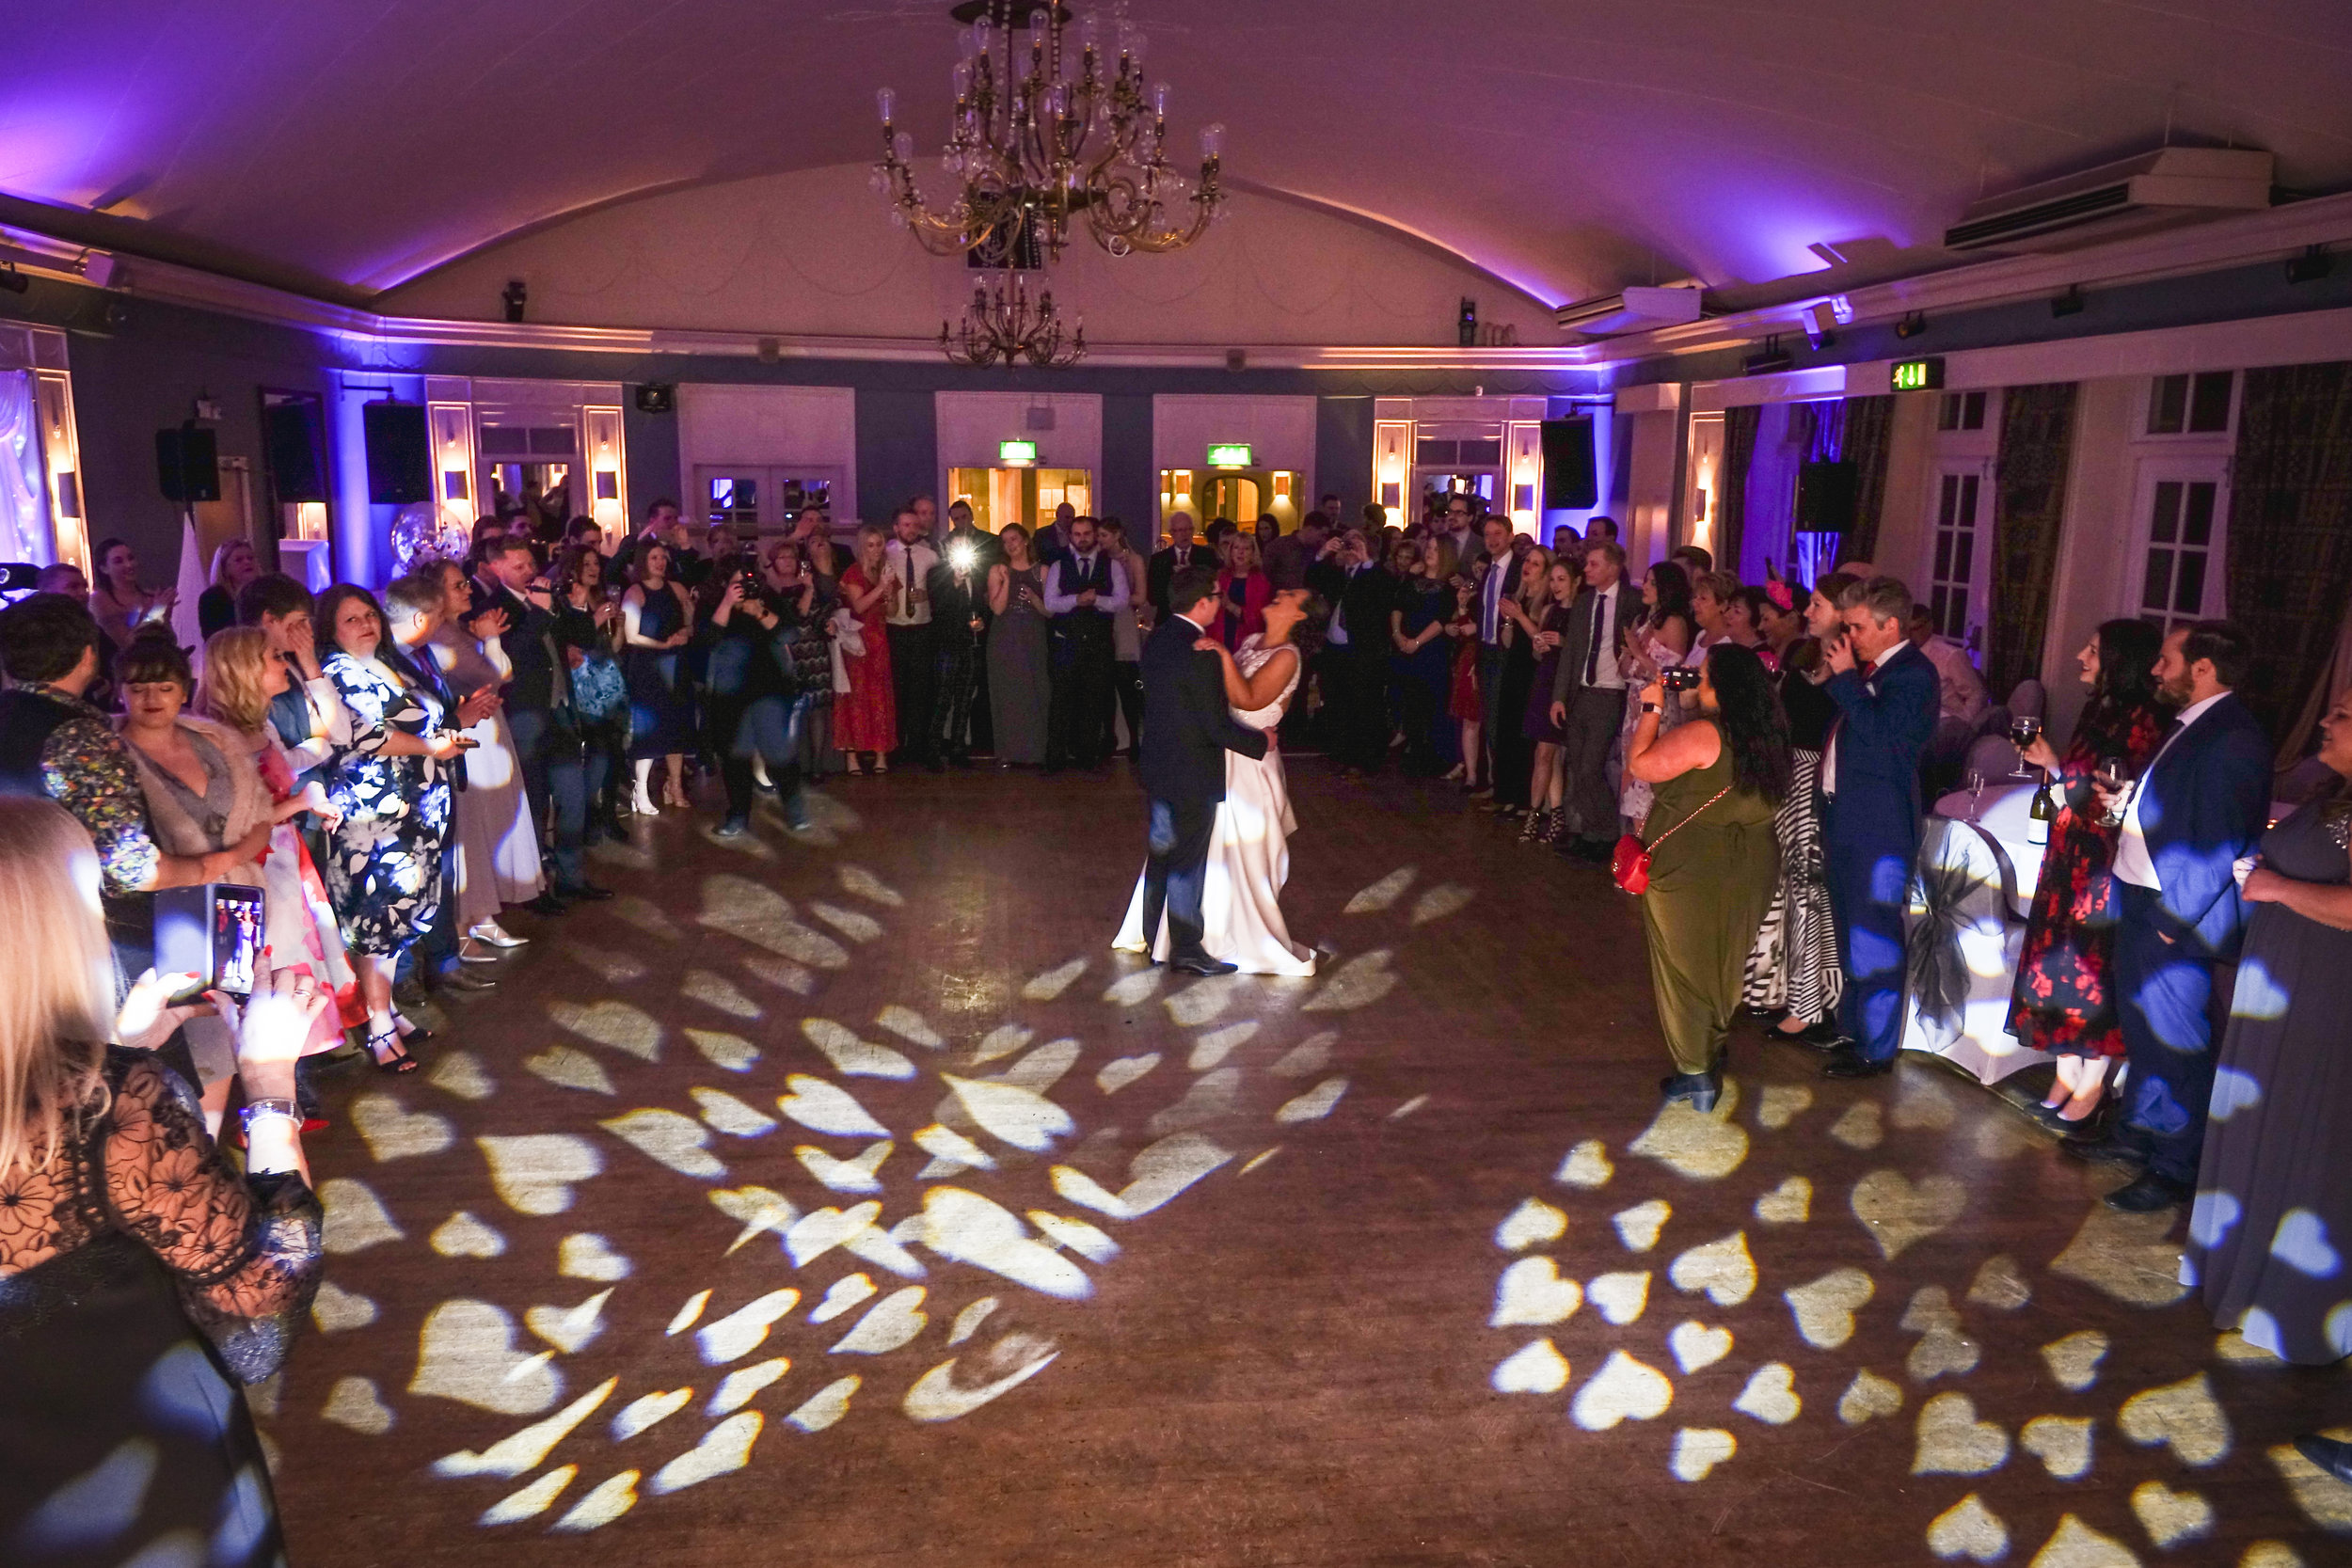 6 tips to ensure you have an awesome wedding reception